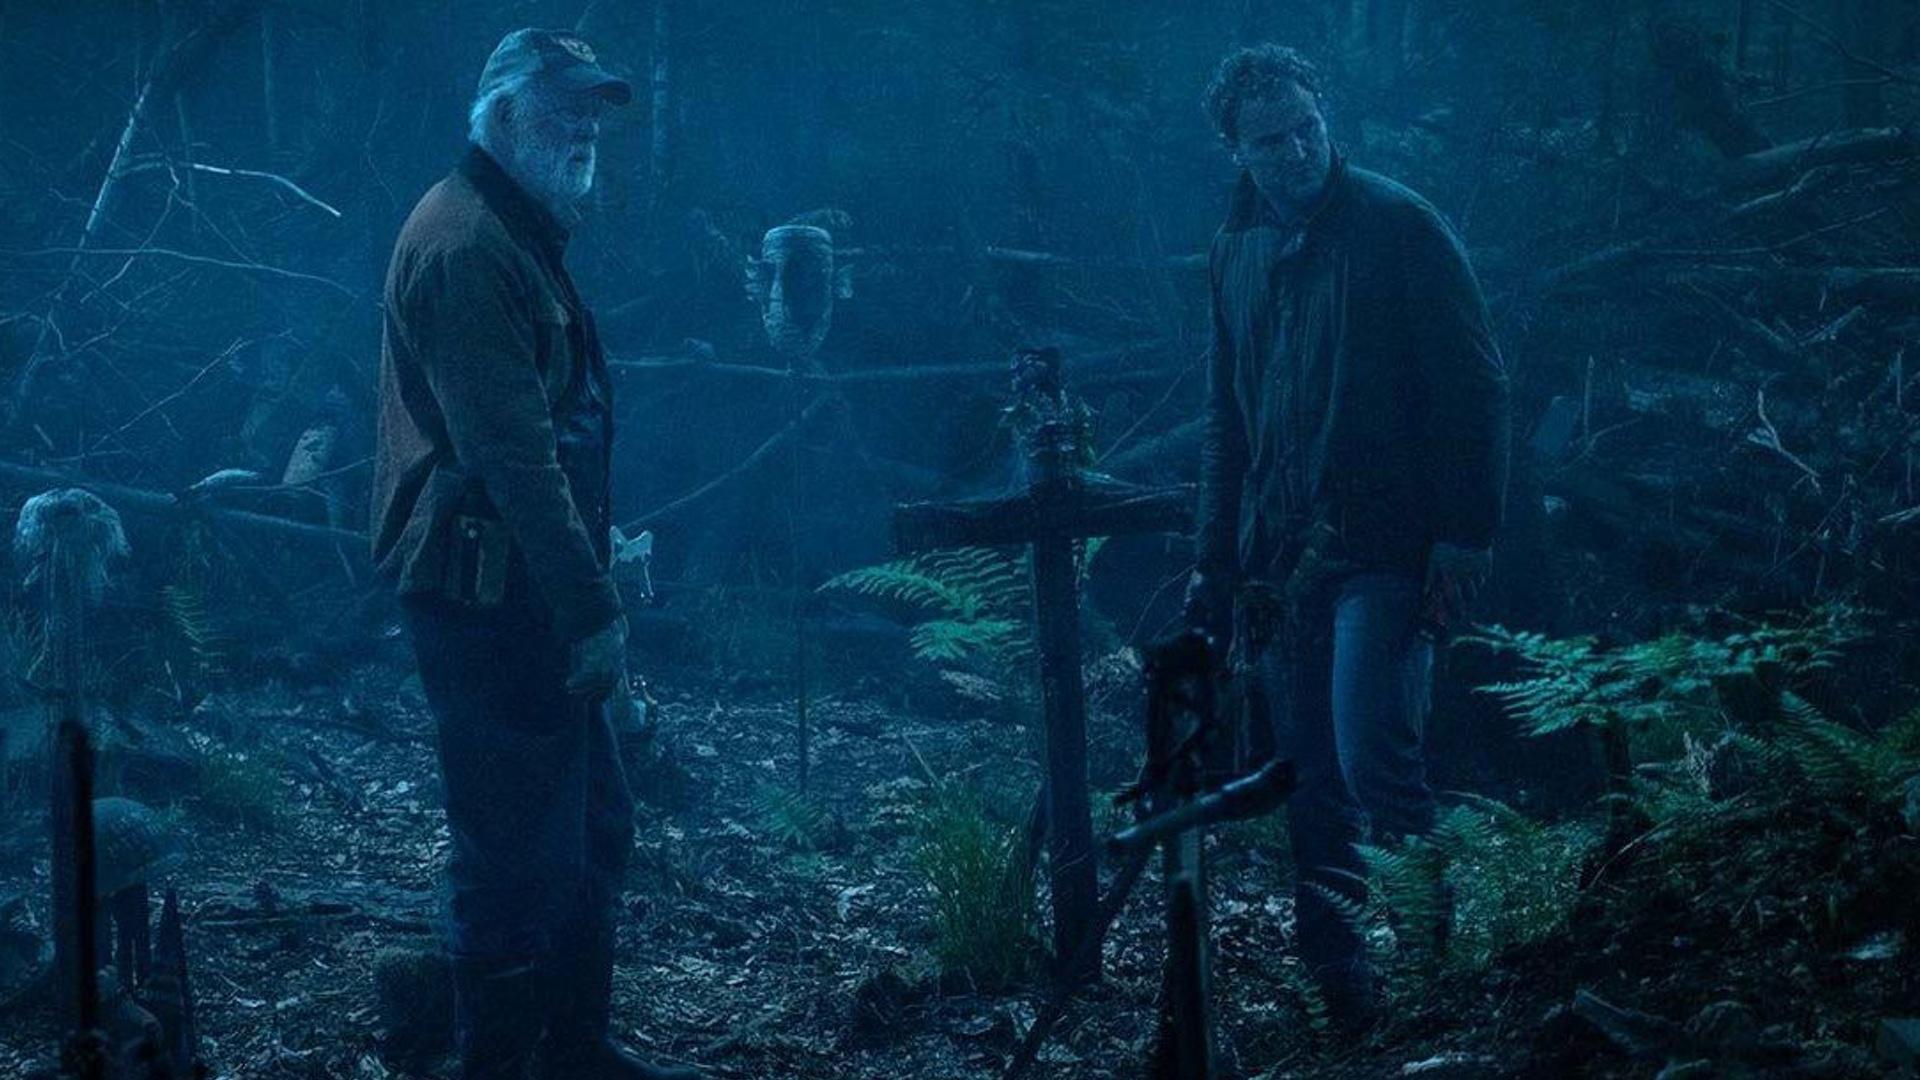 A PET SEMATARY Prequel Film Is a Possibility According to Producer